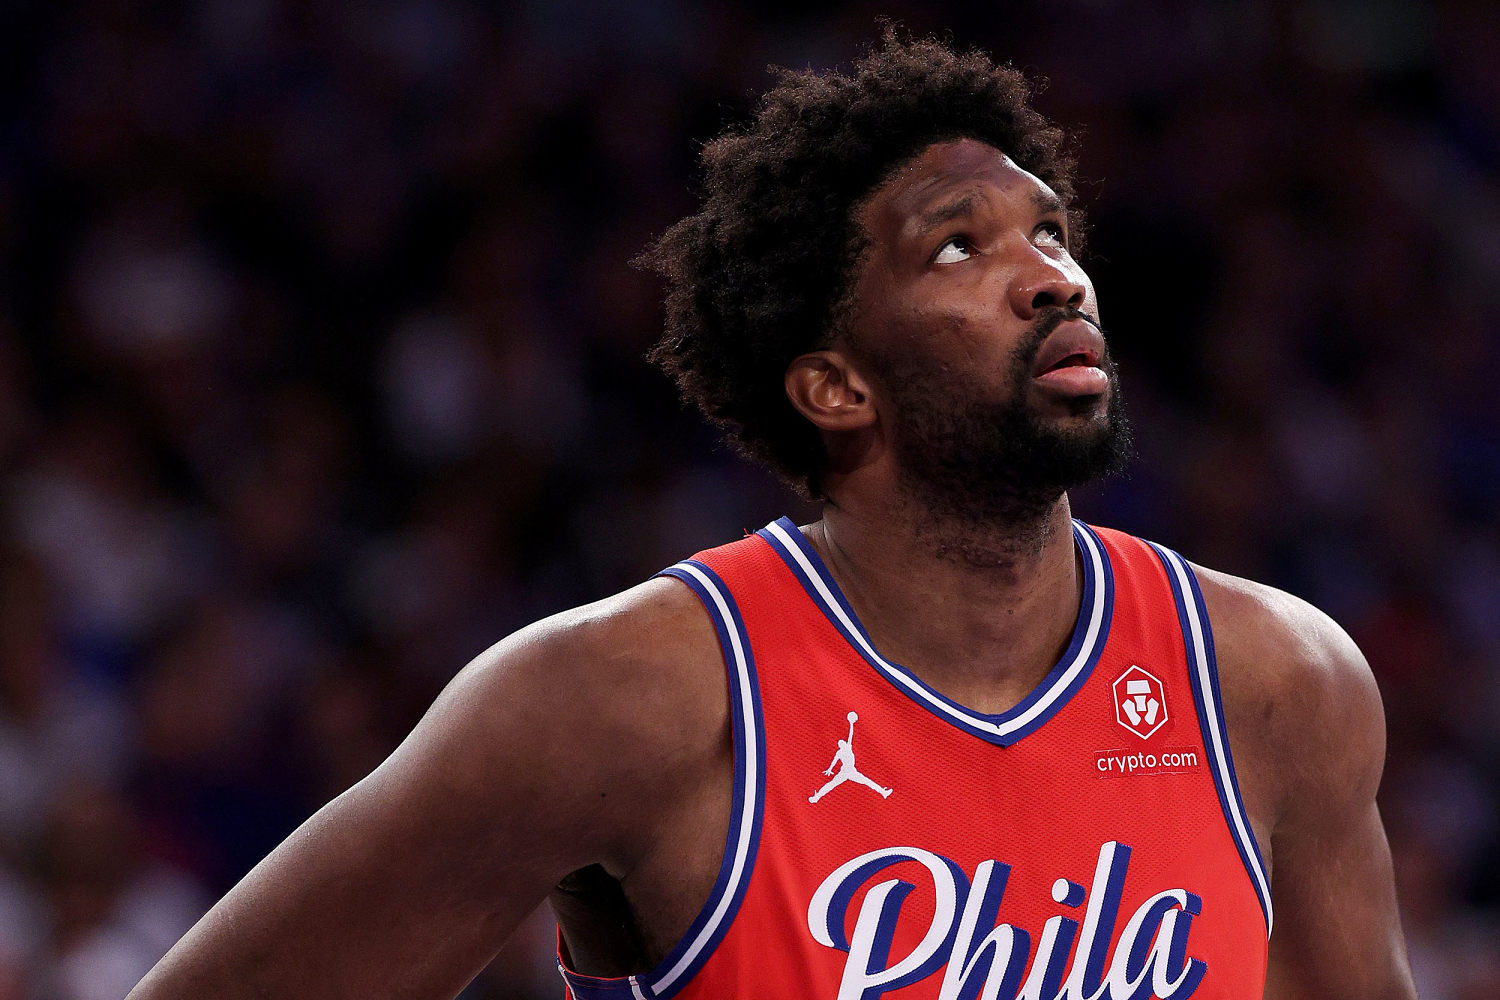 76ers All-Star Joel Embiid says he was diagnosed with Bell’s palsy before the playoffs started